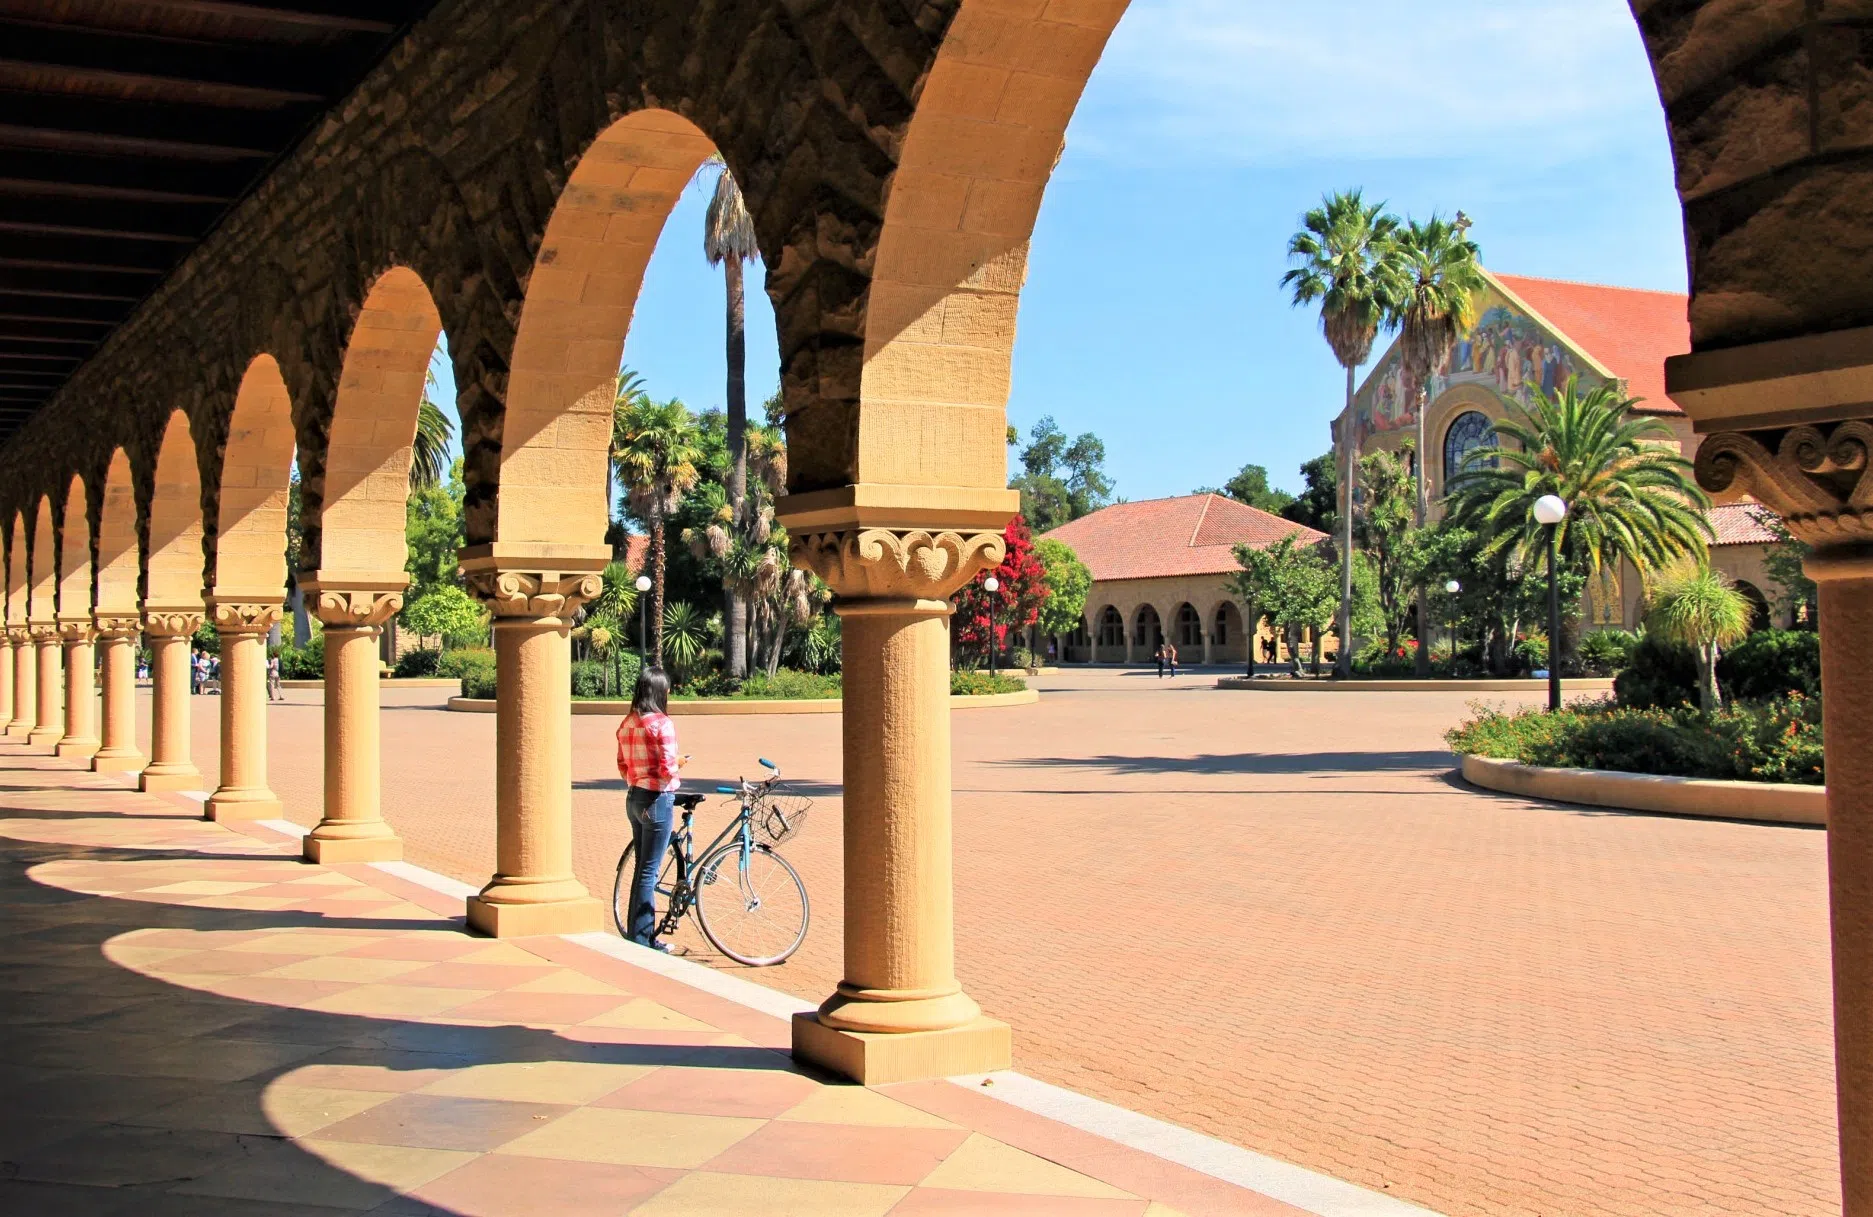 A student stands with bicycle between two of the many sandstone arches that surround a mission-style, paved courtard containing multiple "oases" of trees.